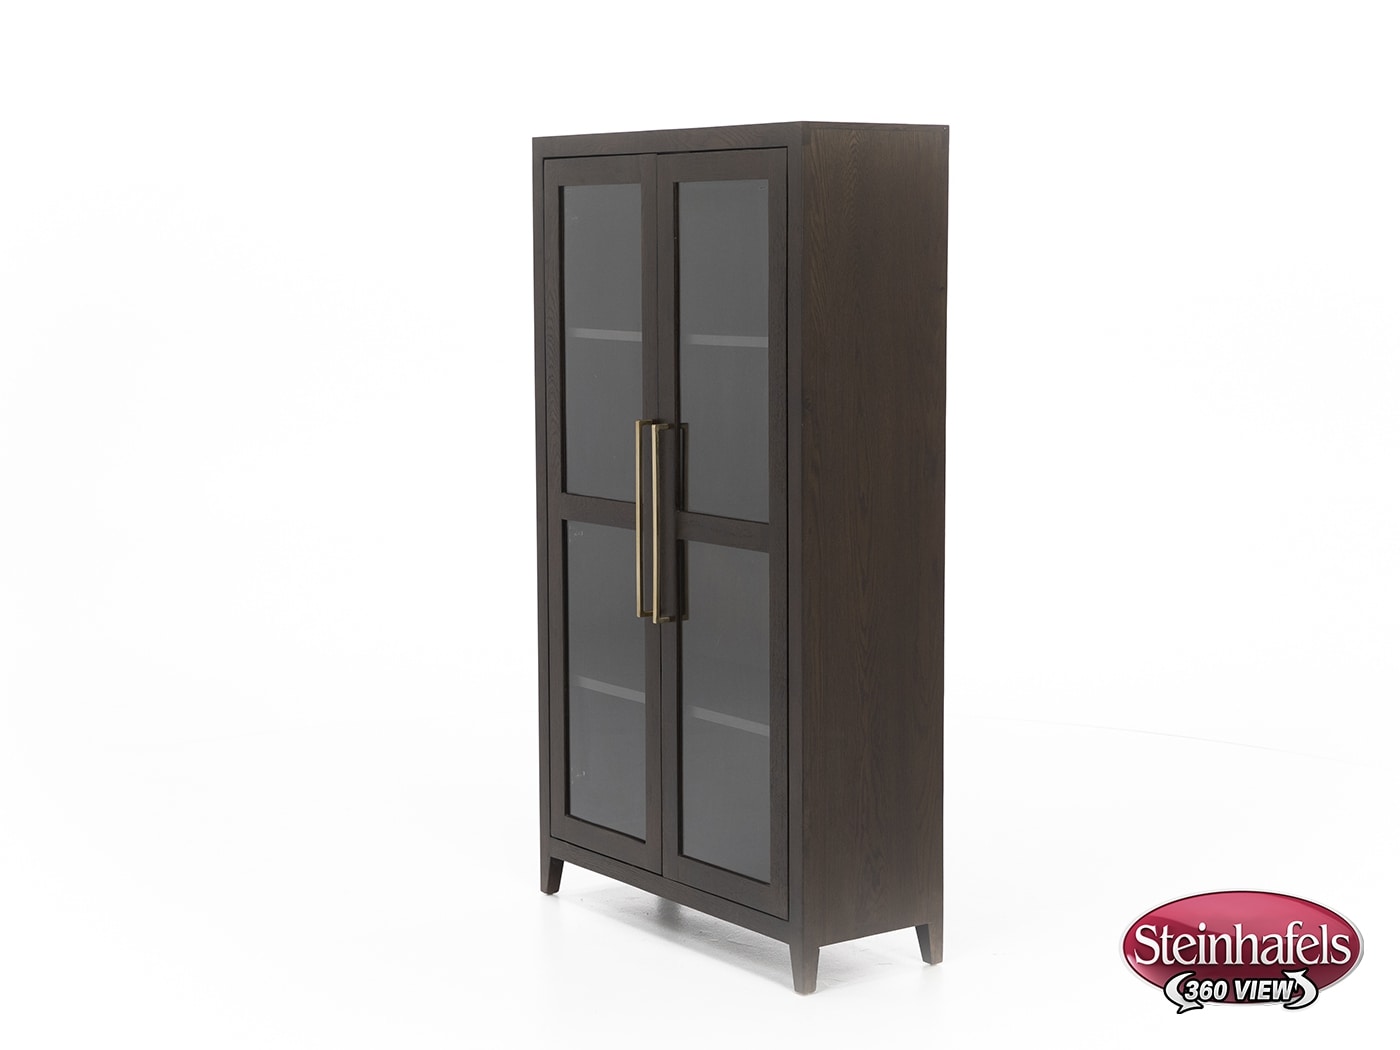 ashy brown chests cabinets  image sto  